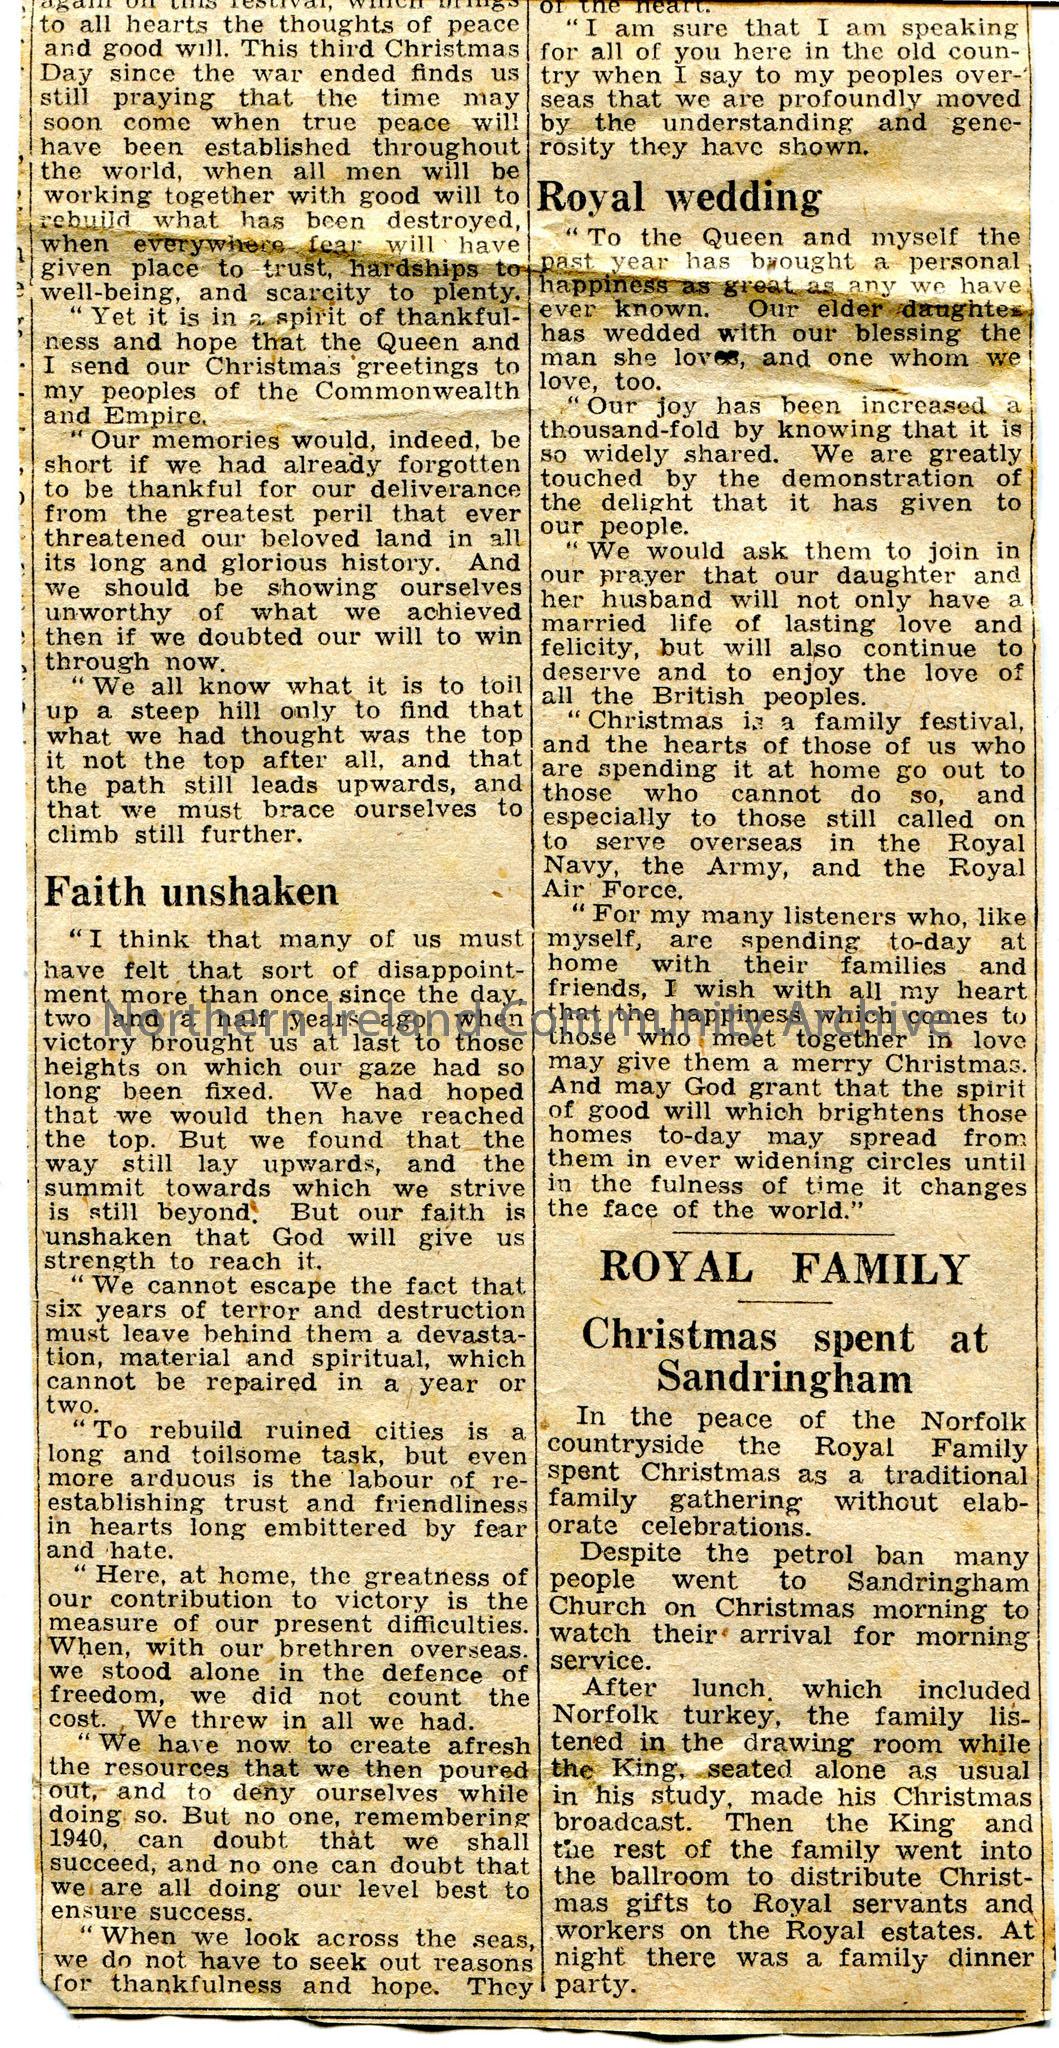 Newspaper cutting from the Belfast News-Letter, Saturday 27th December, 1947. Article titled, “King’s Broadcast, Confidence in Britain’s future”. Arti… – img024b